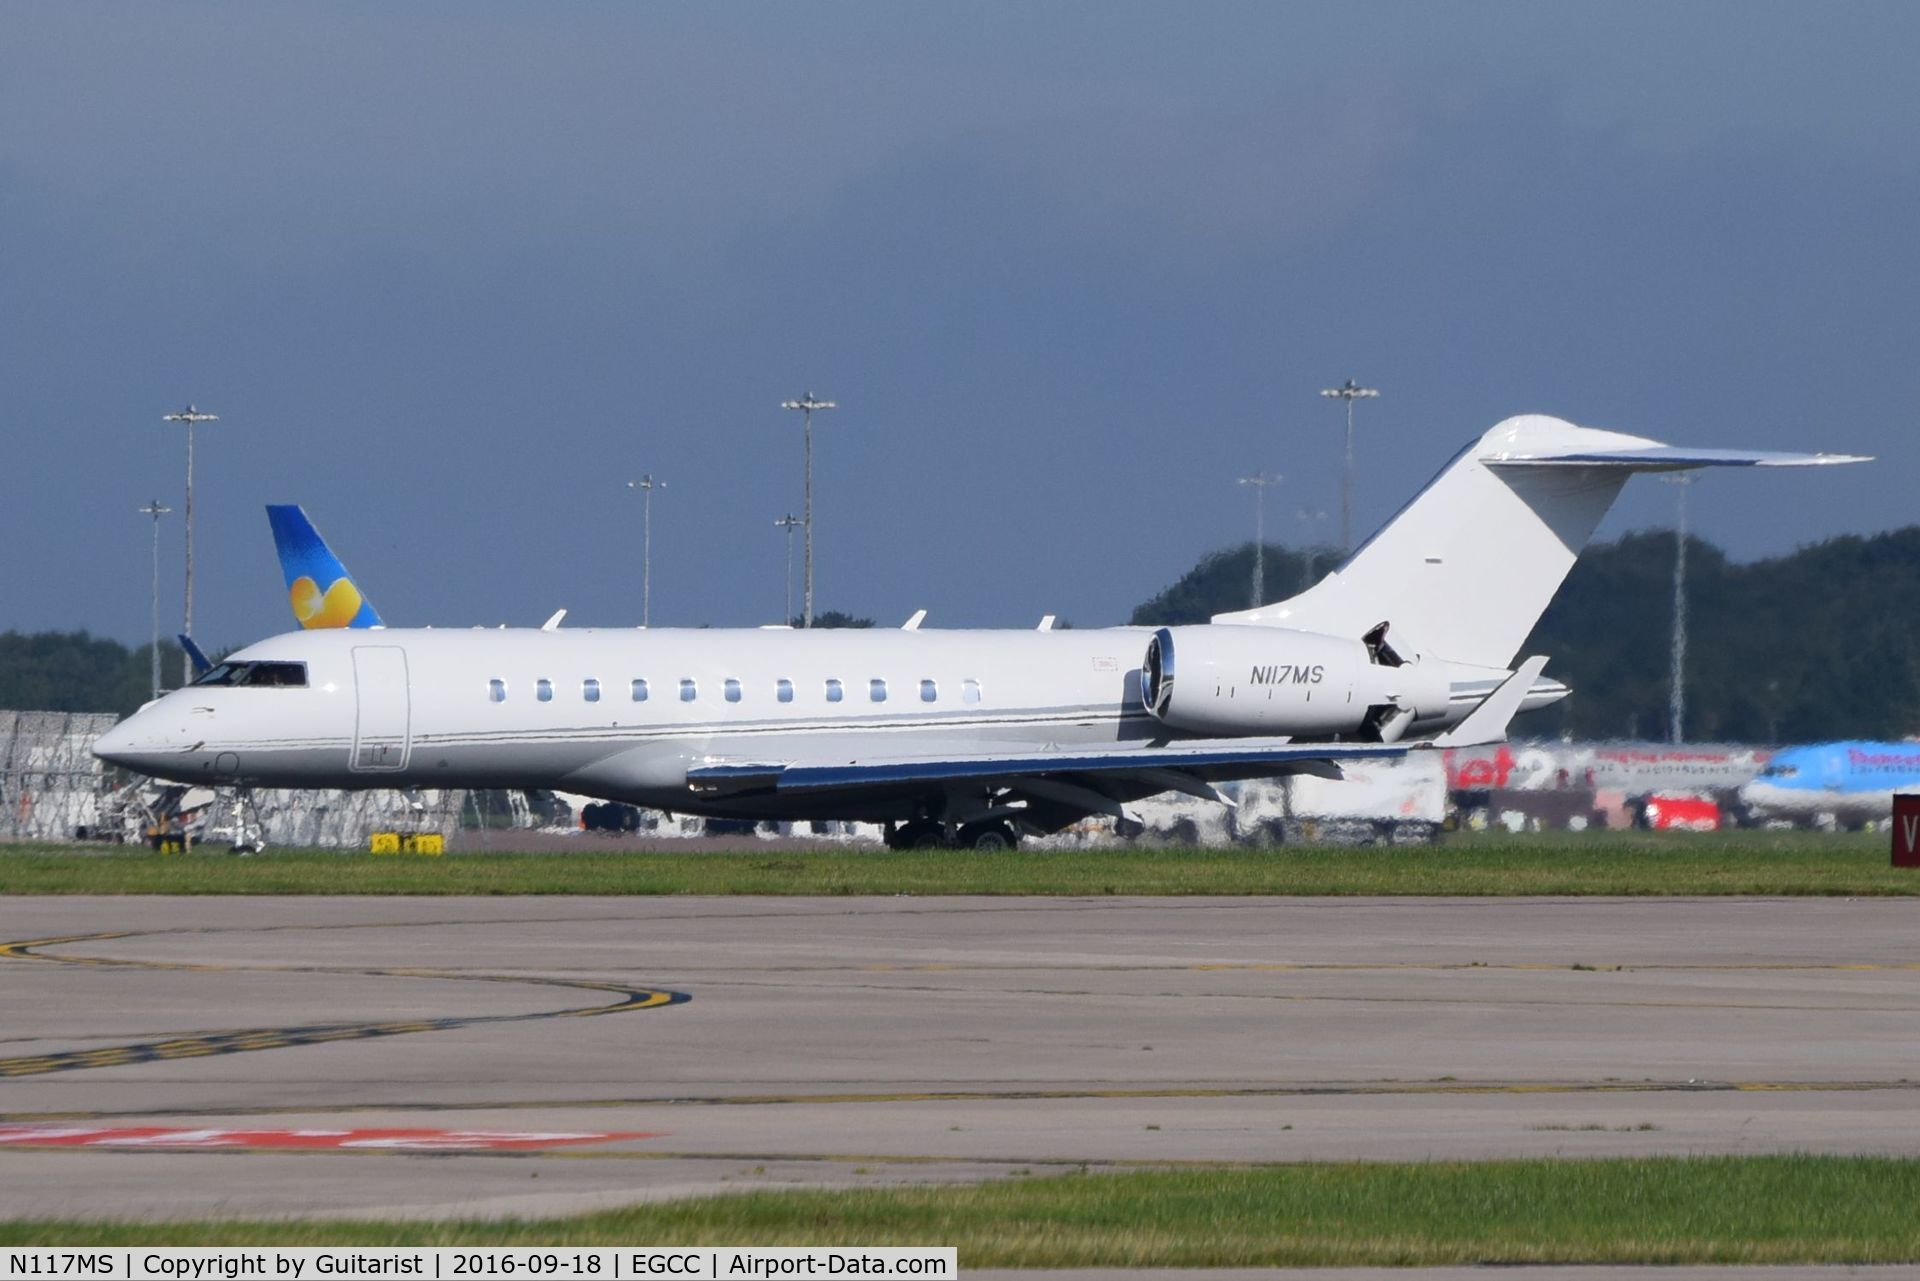 N117MS, 2010 Bombardier BD-700-1A11 Global 5000 C/N 9386, At Manchester